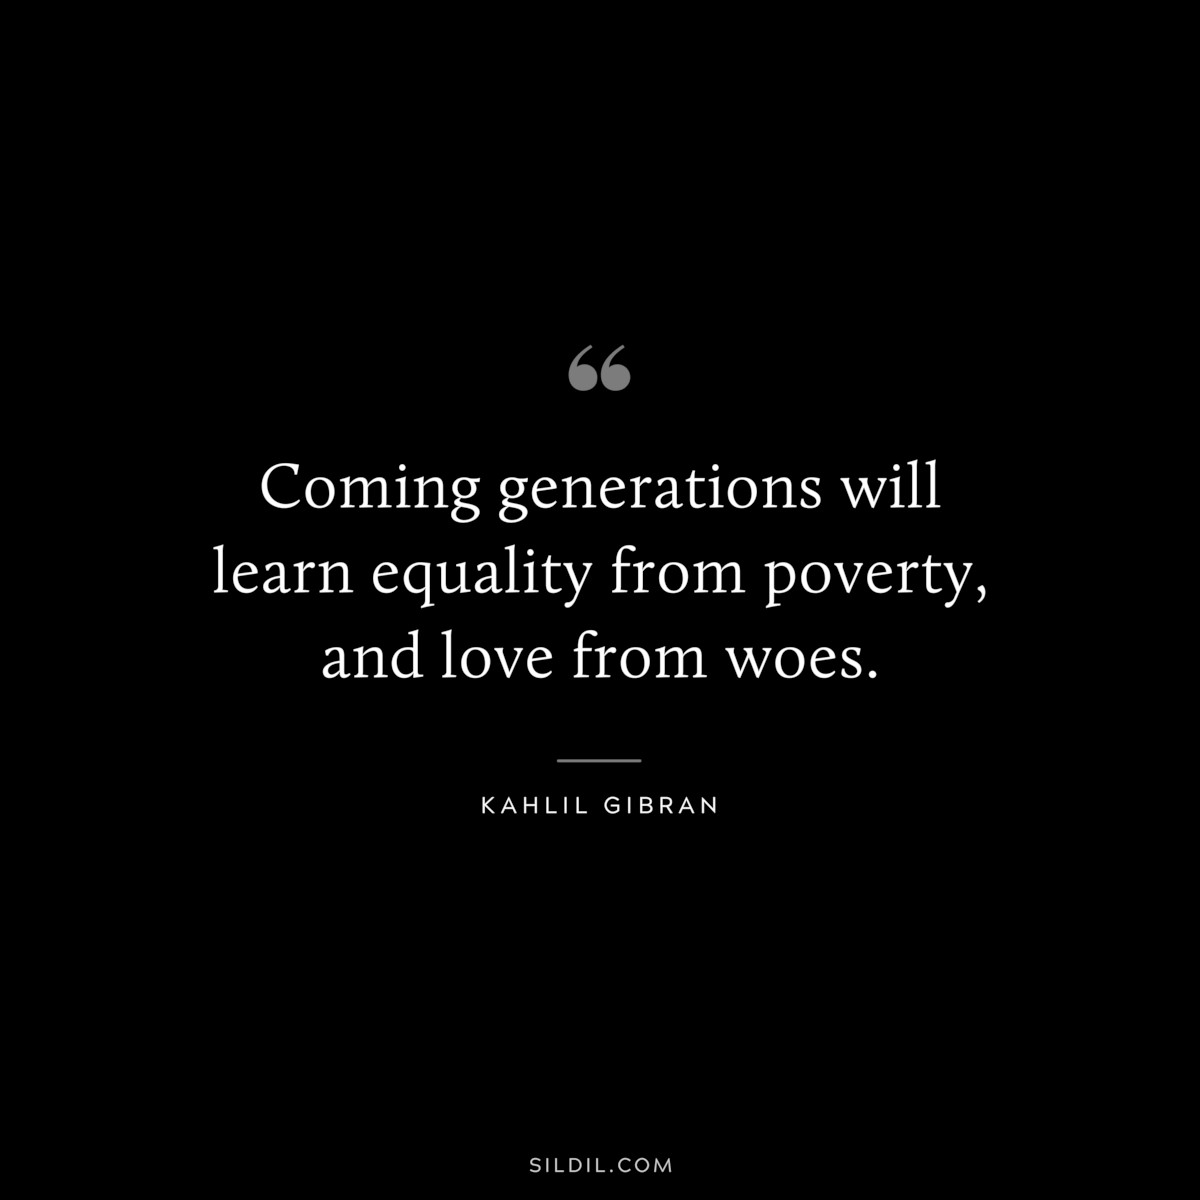 Coming generations will learn equality from poverty, and love from woes. ― Kahlil Gibran